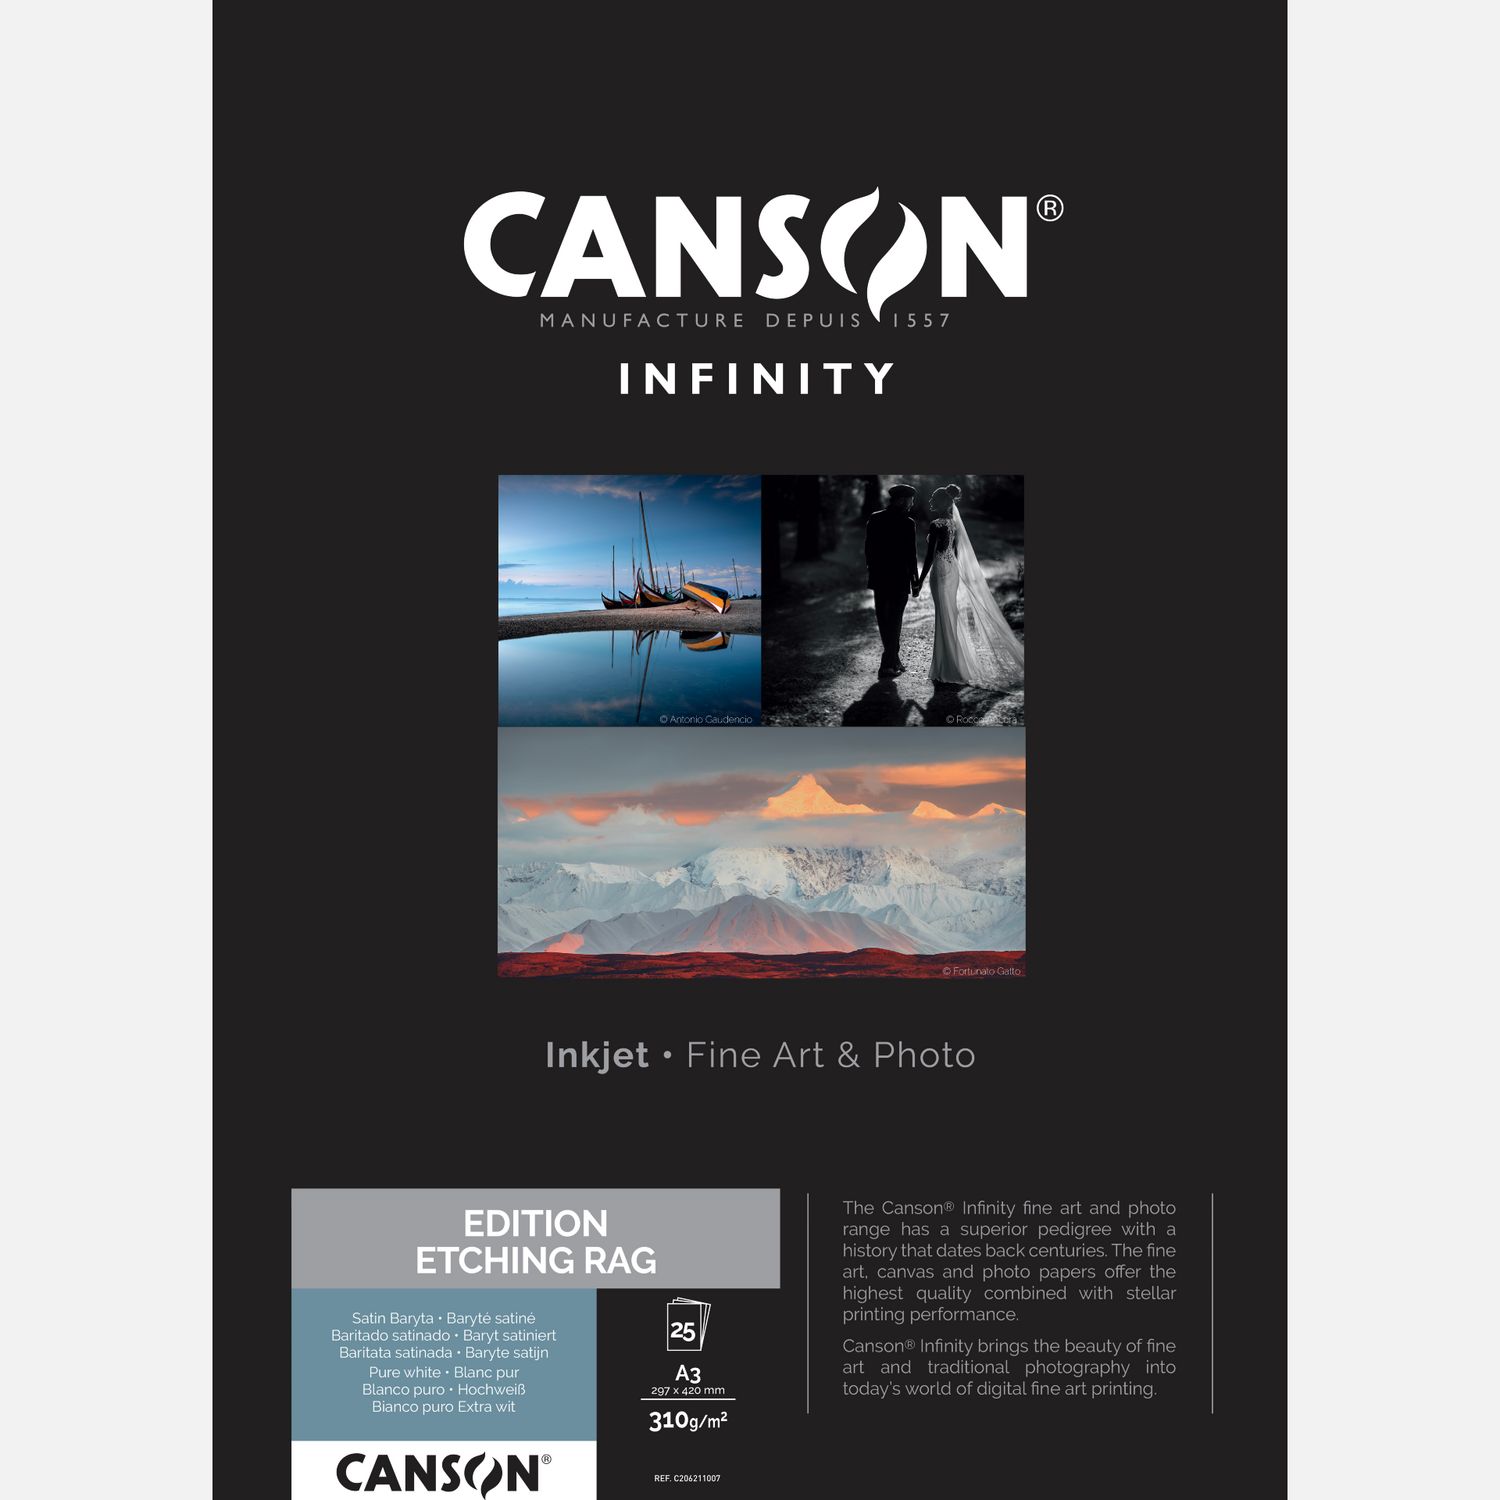 Canson Infinity Edition Etching Rag 310 g/m² A3 - 25 feuilles